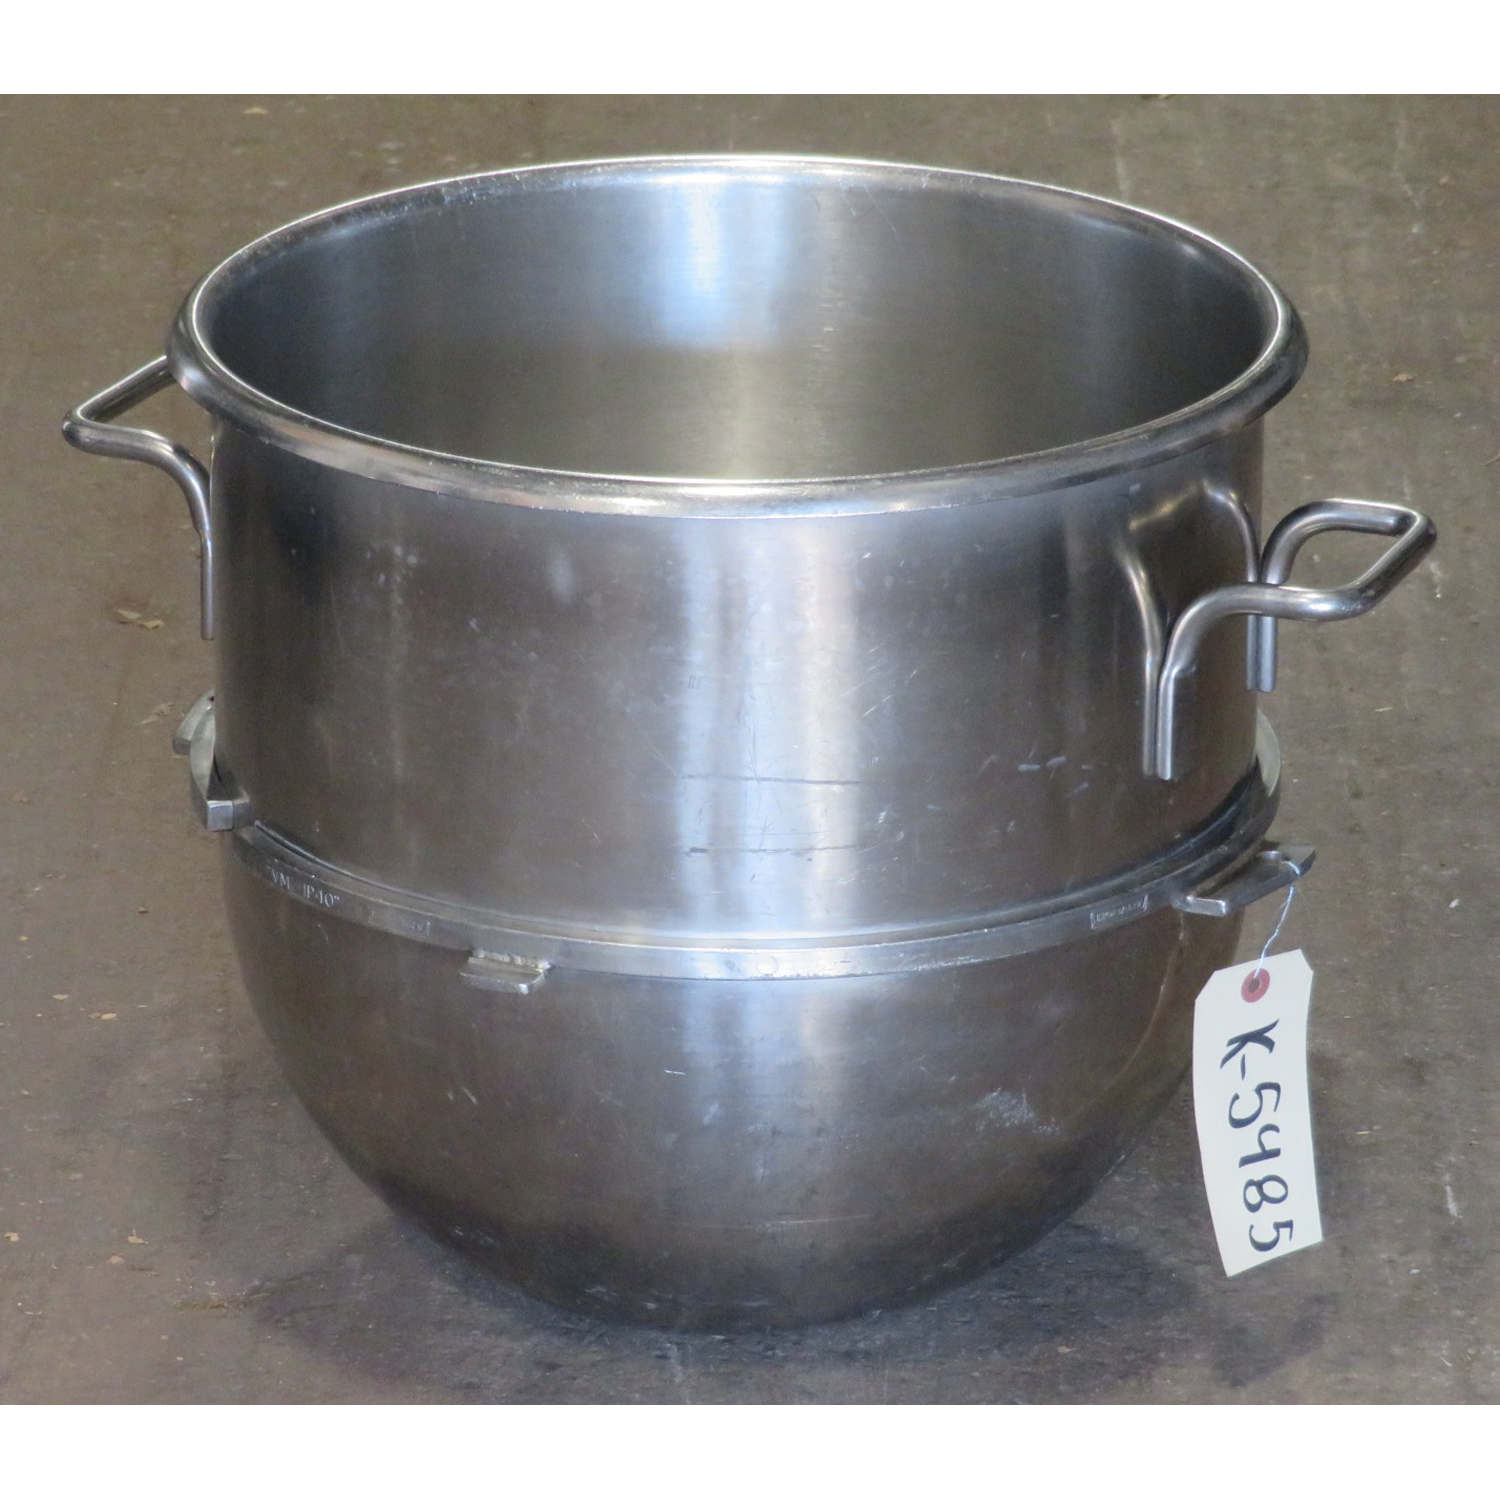 Hobart VMLHP40 40-Quart Bowl for 80 to 40 Bowl Adapter, Used Excellent Condition image 1